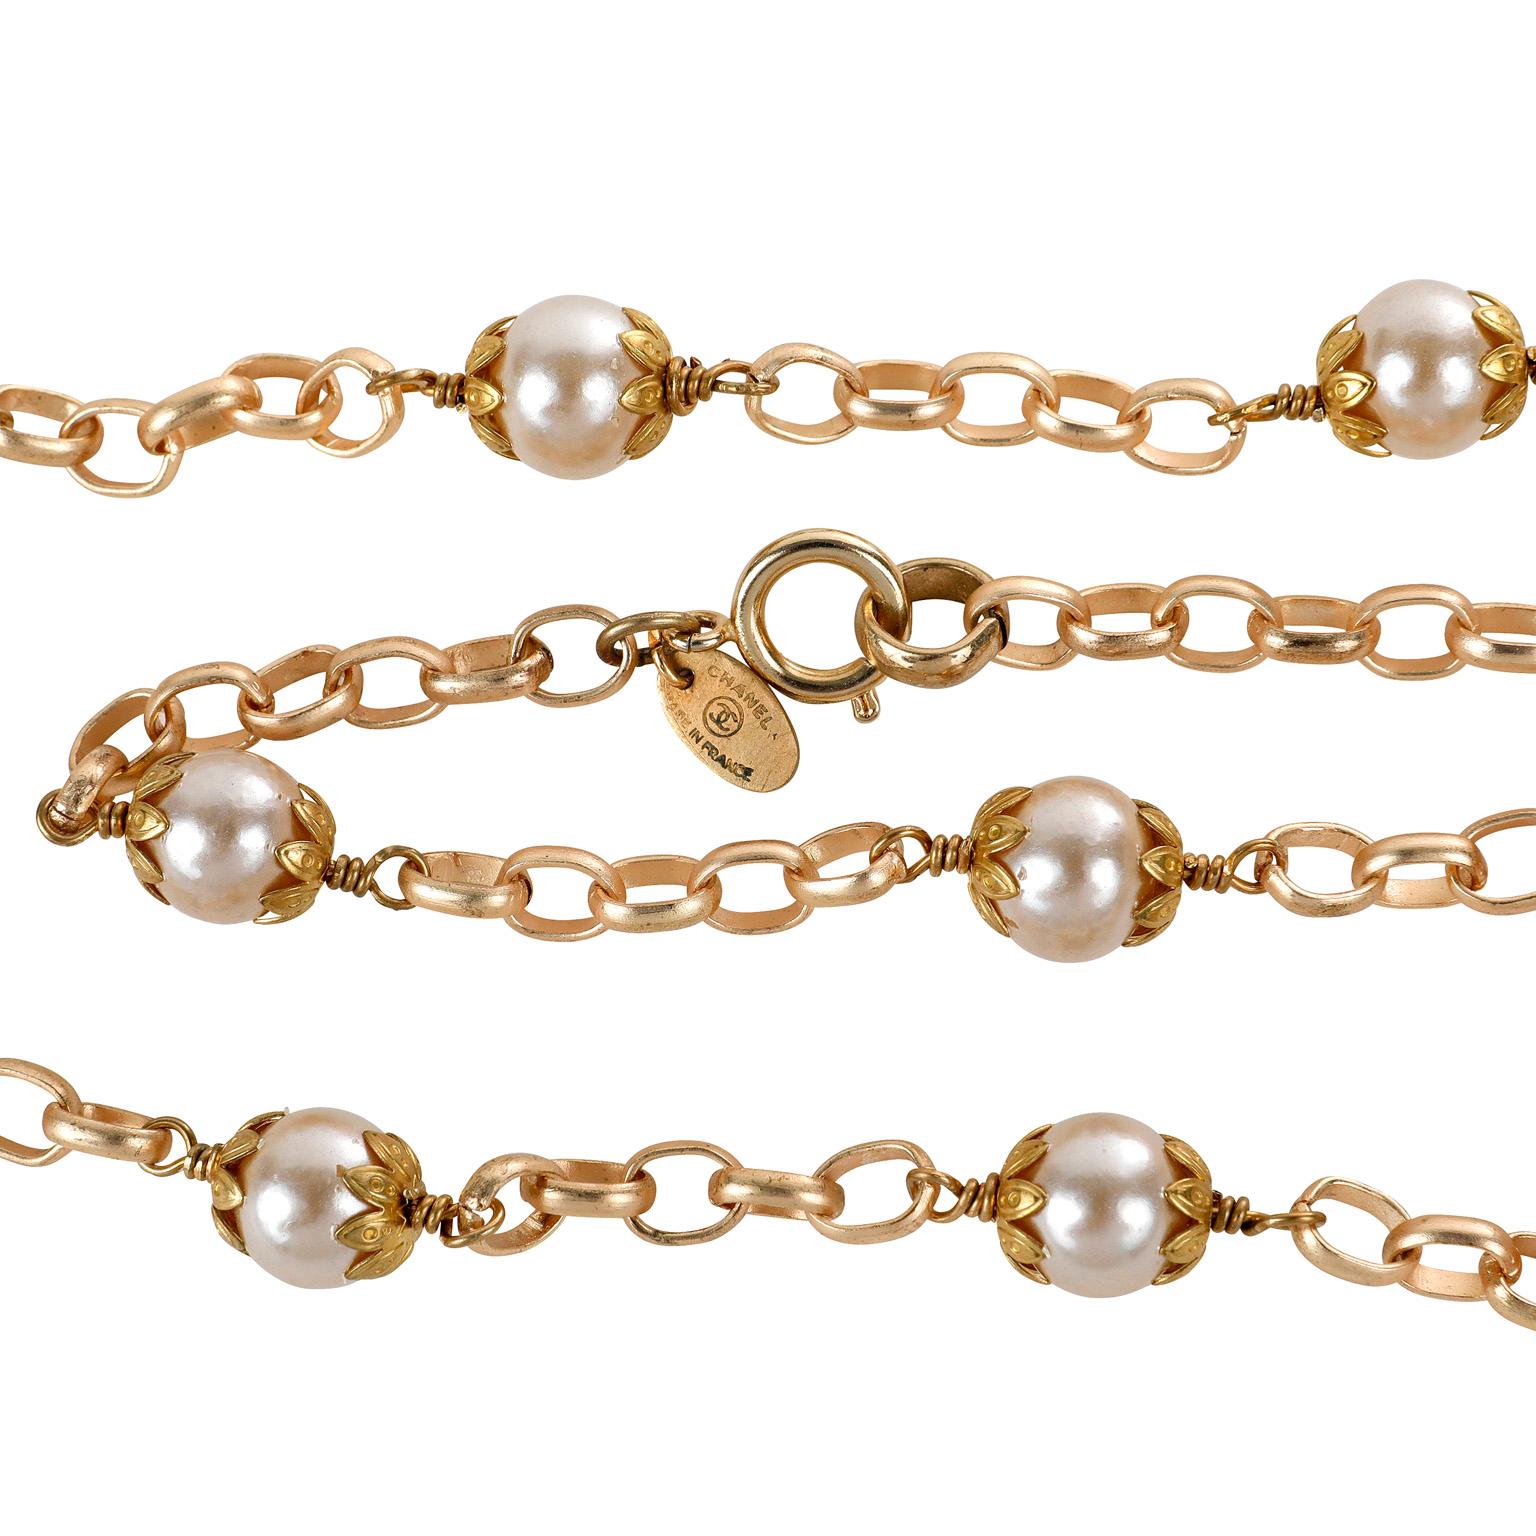 This authentic Chanel Pearl and Gold Link Necklace is in excellent vintage condition from the 1980’s.  Single faux pearls are situated on a long matte gold linked chain.  22 inches long with adjustable length.   Made in France.  Pouch or box